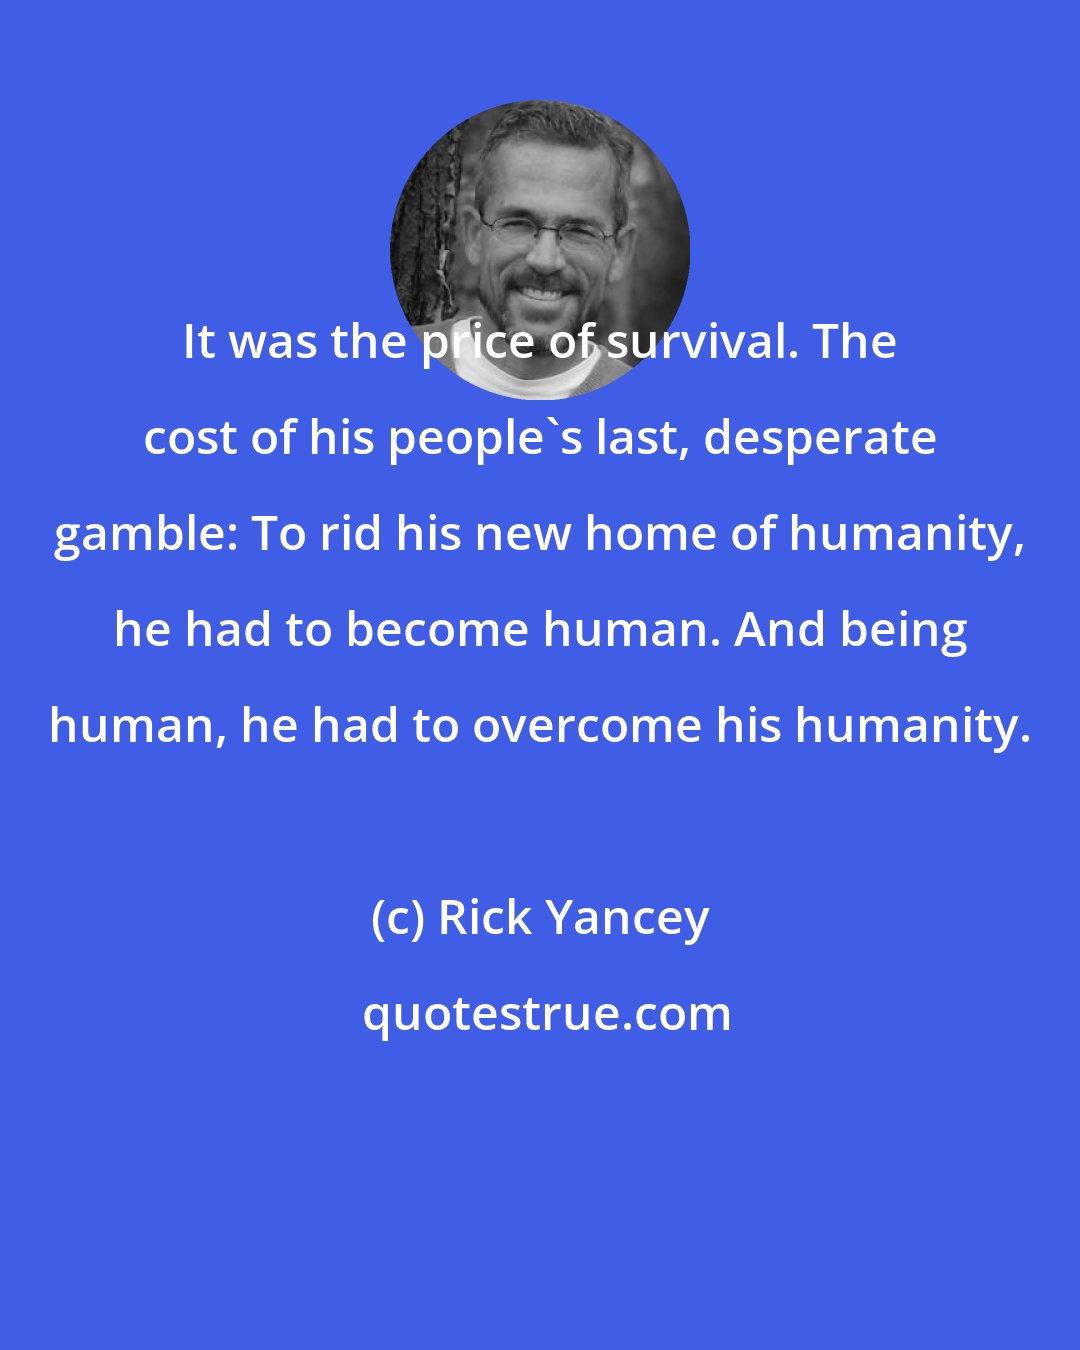 Rick Yancey: It was the price of survival. The cost of his people's last, desperate gamble: To rid his new home of humanity, he had to become human. And being human, he had to overcome his humanity.